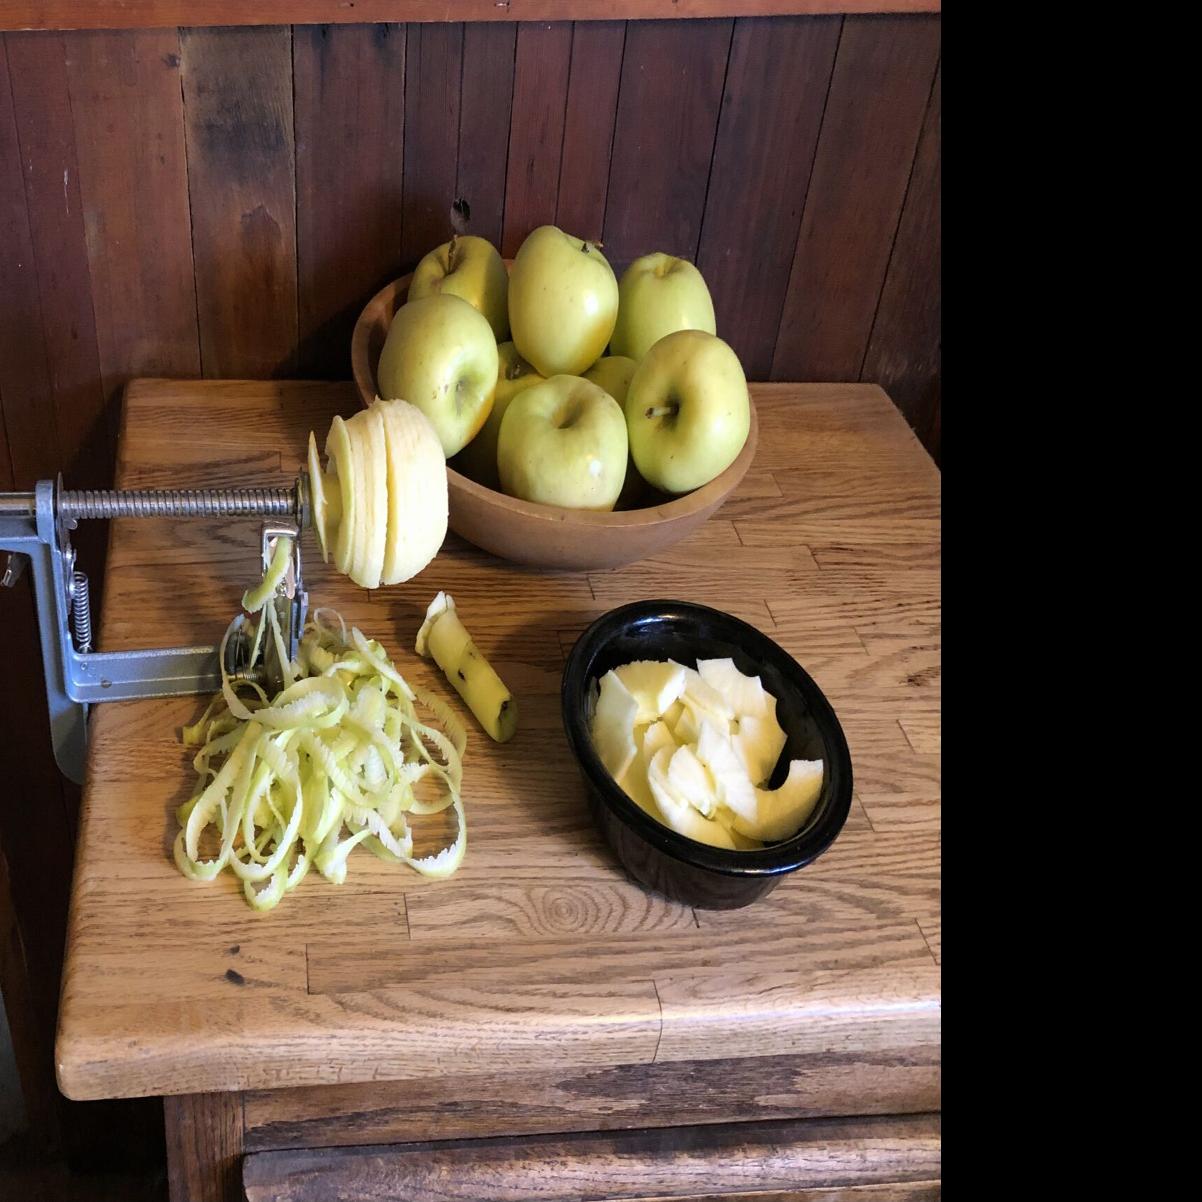 How to Use an Apple Peeler? Made Easy